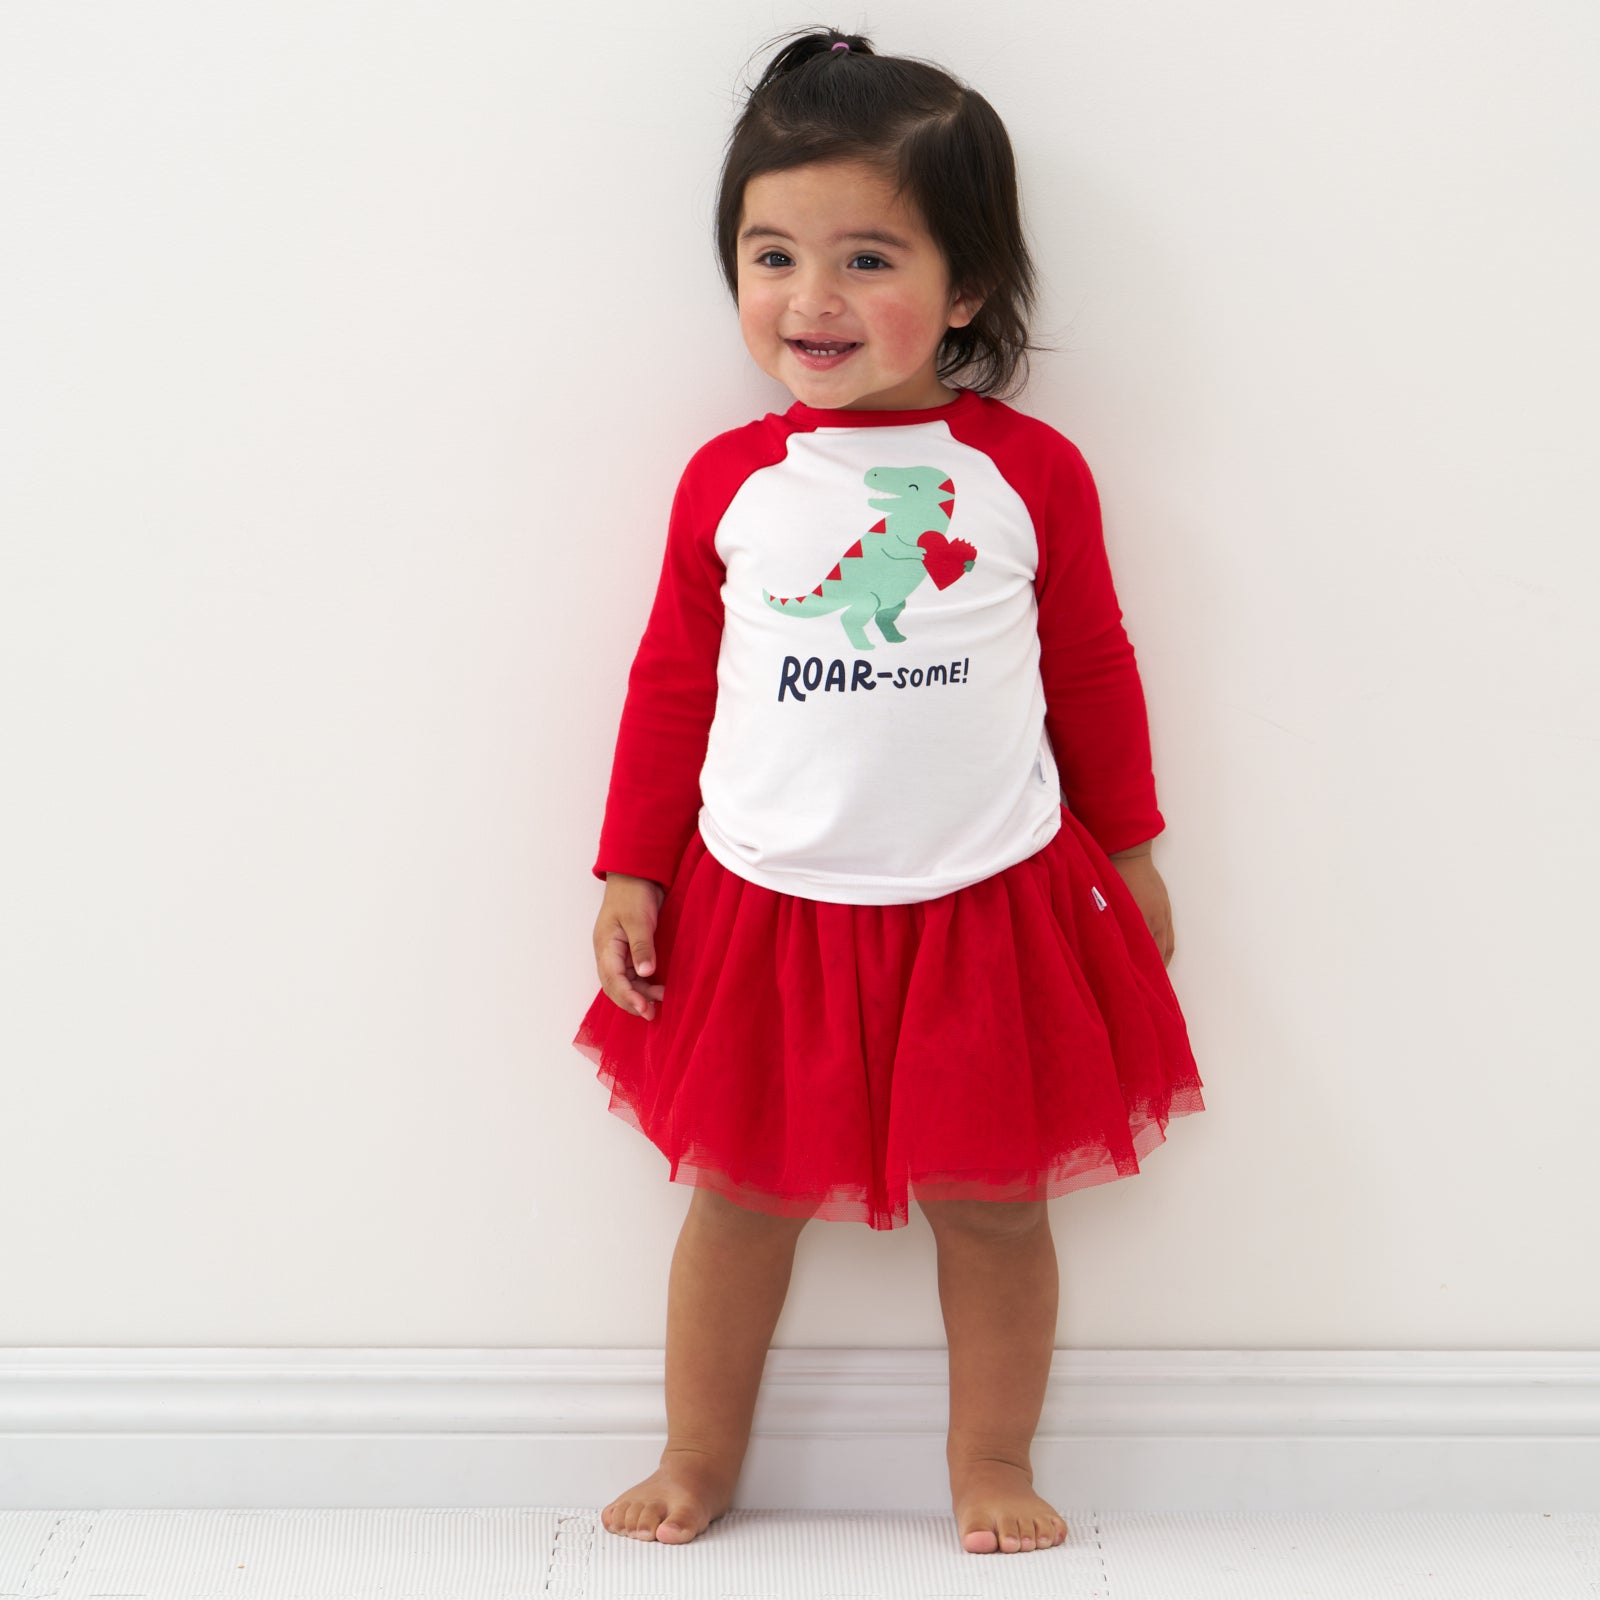 Child wearing a Candy Red tutu skirt with coordinating graphic tee